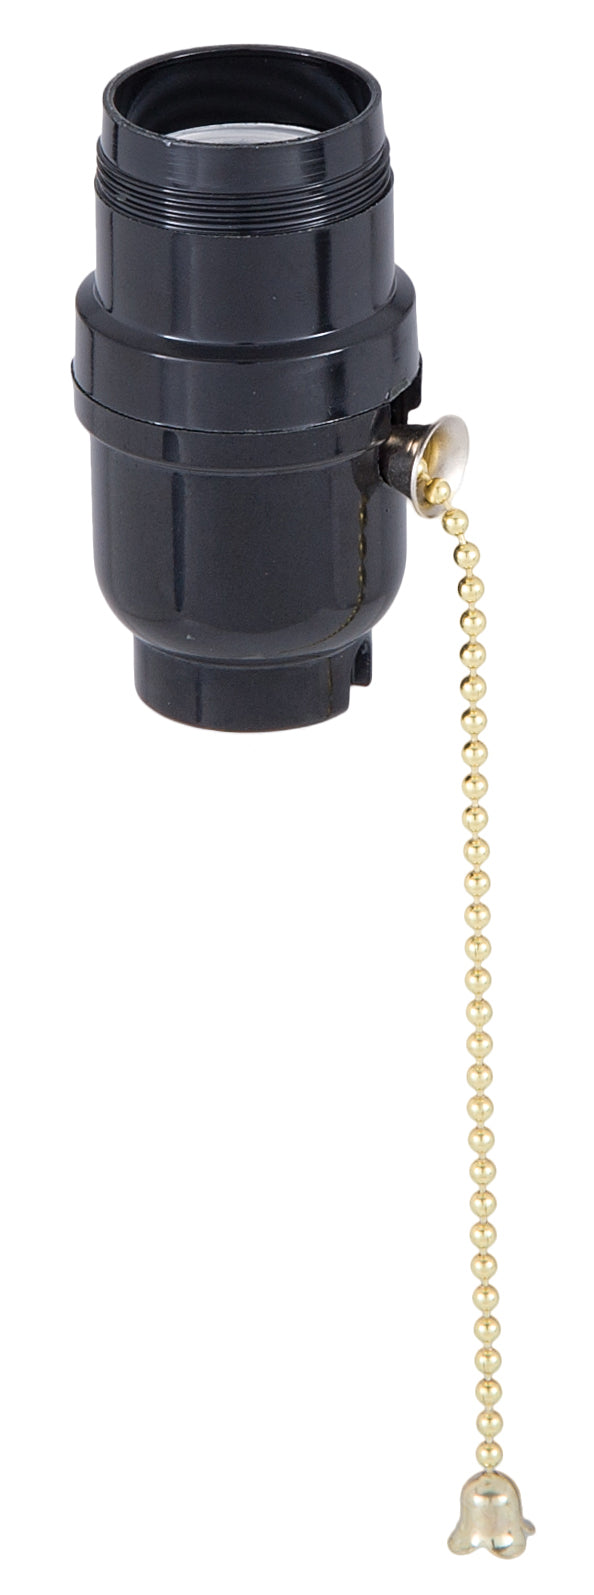 Plastic Pull Chain Socket With Brass Chain and UNO Threads